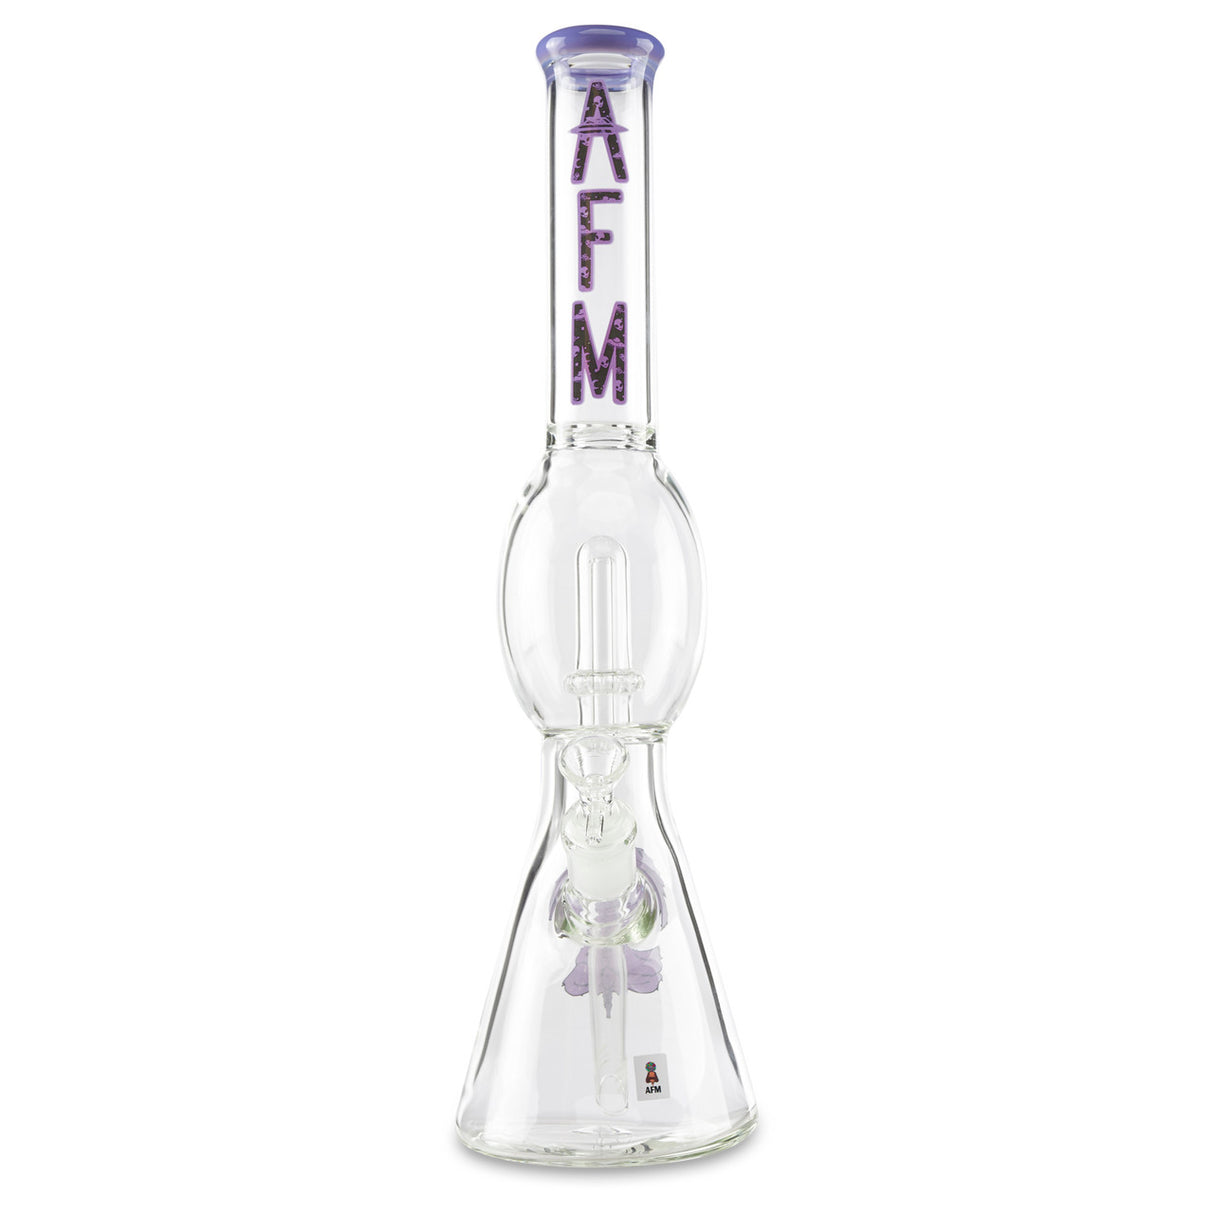 afm ufo perc 18 inch glass bong for smoking herbs